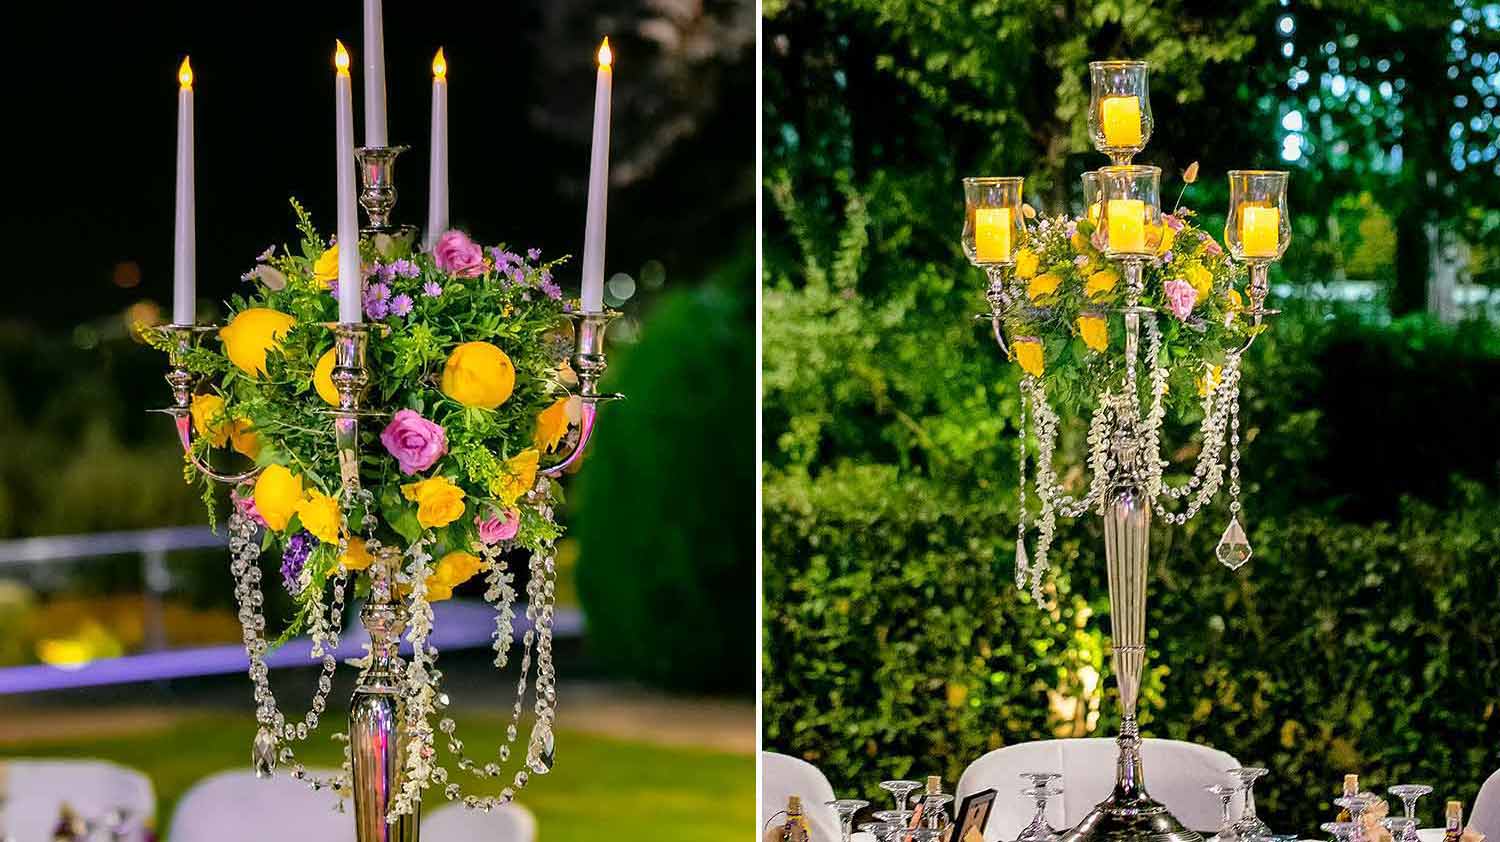 Silver andelabras with citrus lemons and yellow pastel roses as a wedding centerpiece by Diamond Events 1